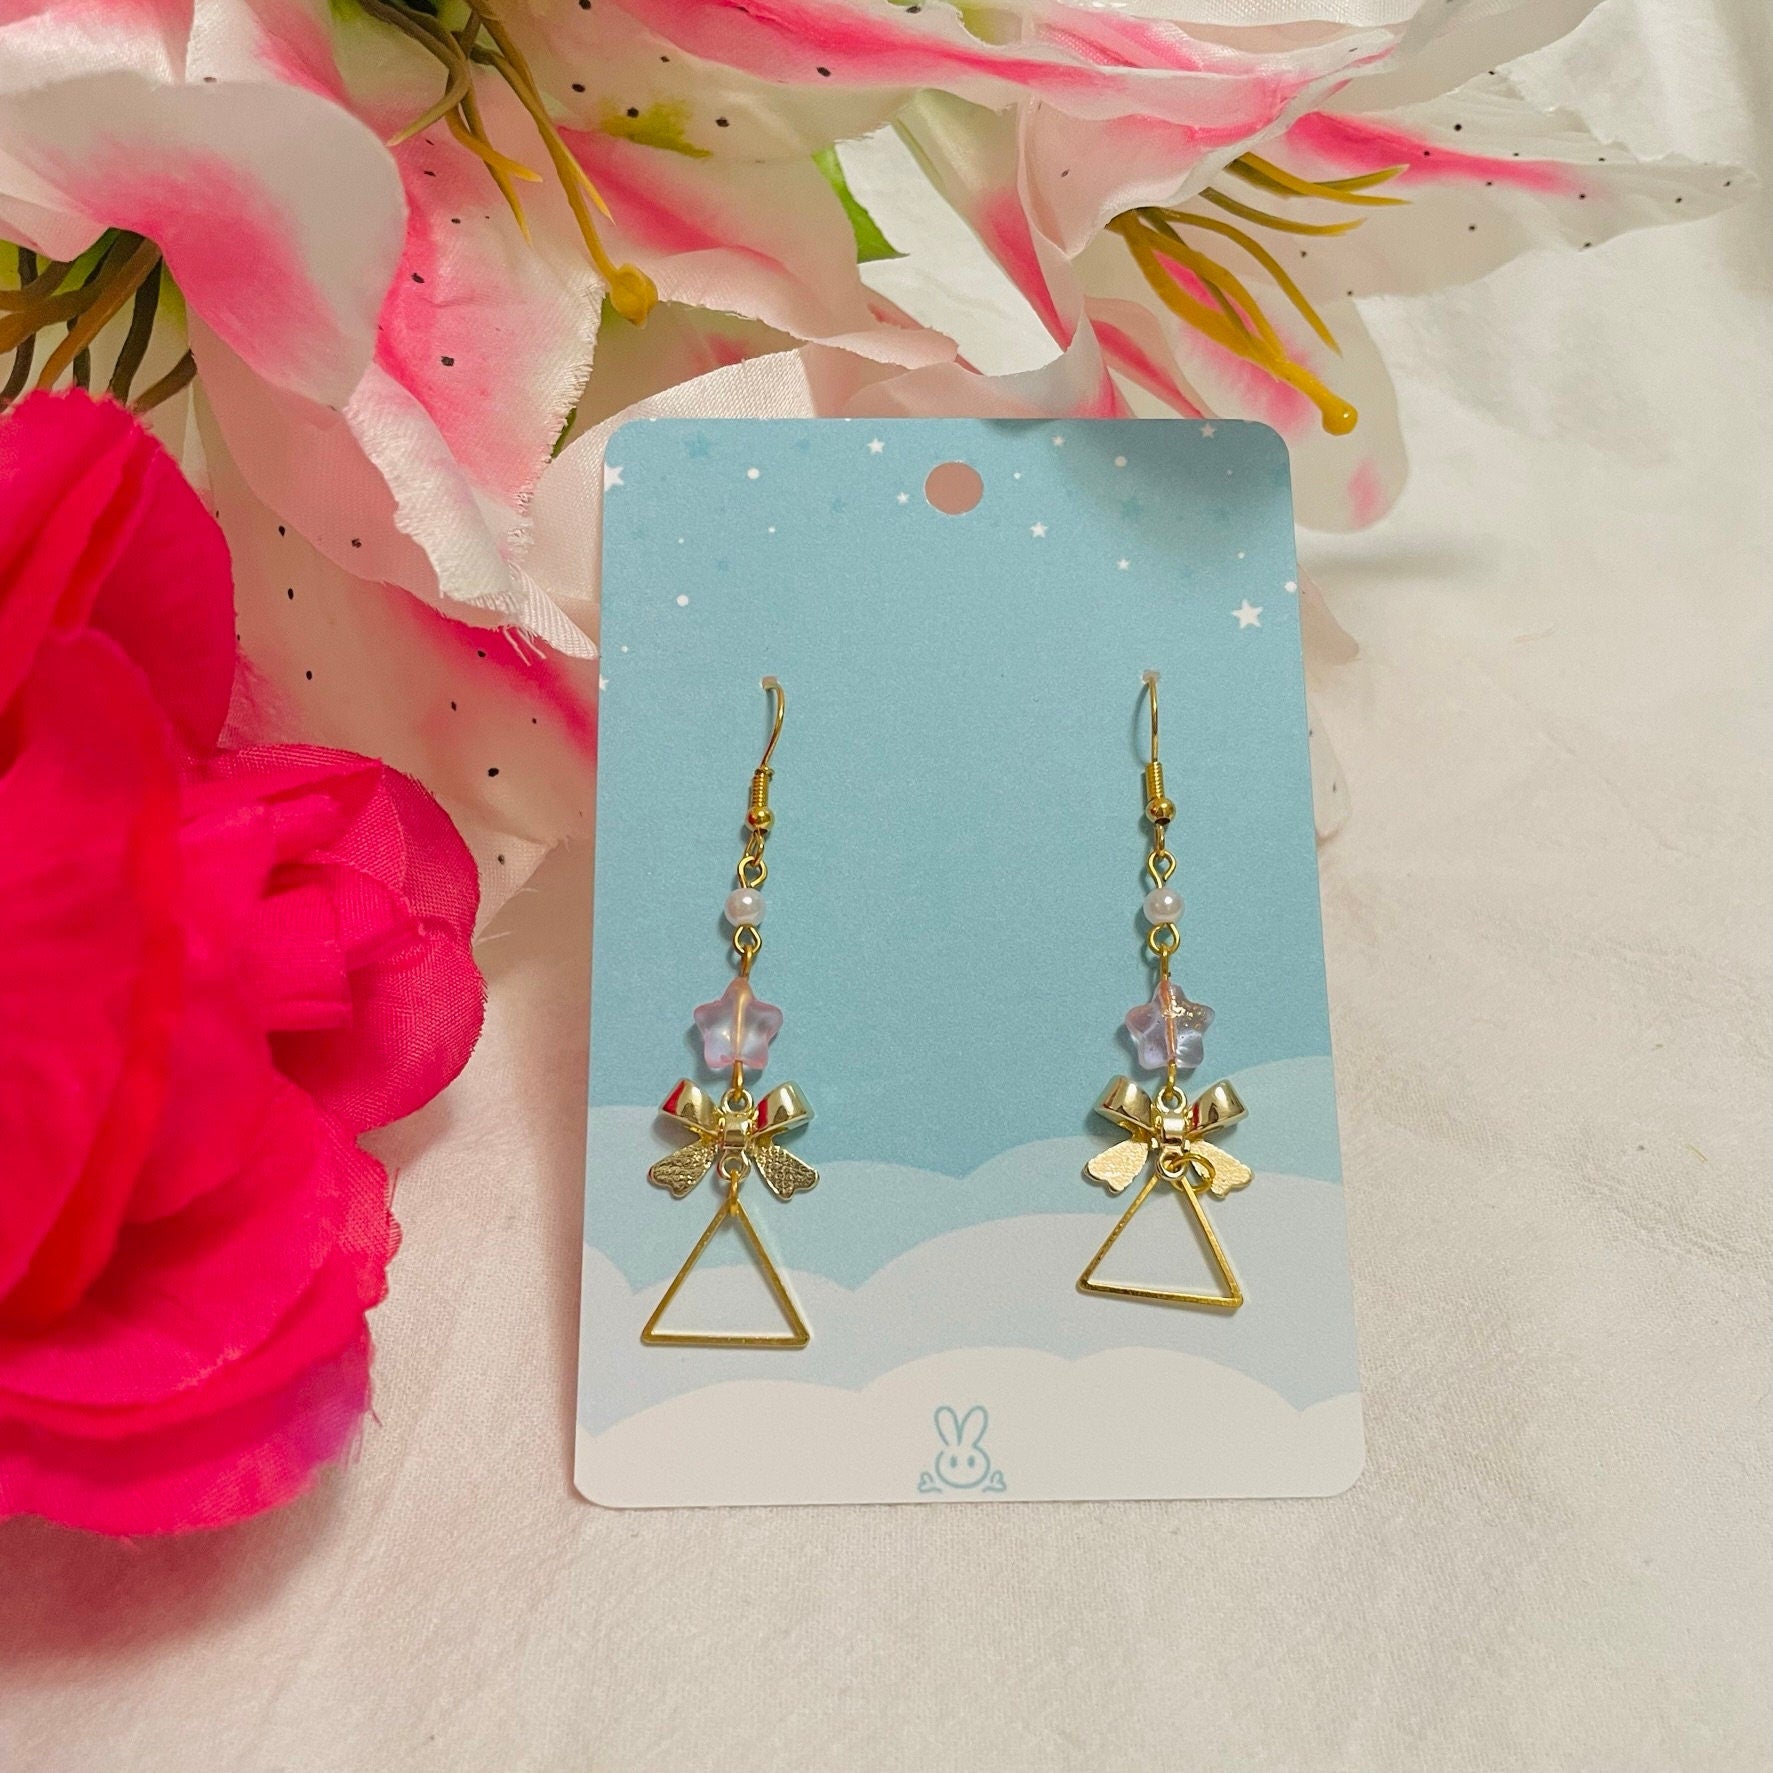 Details more than 78 anime inspired earrings best  incdgdbentre